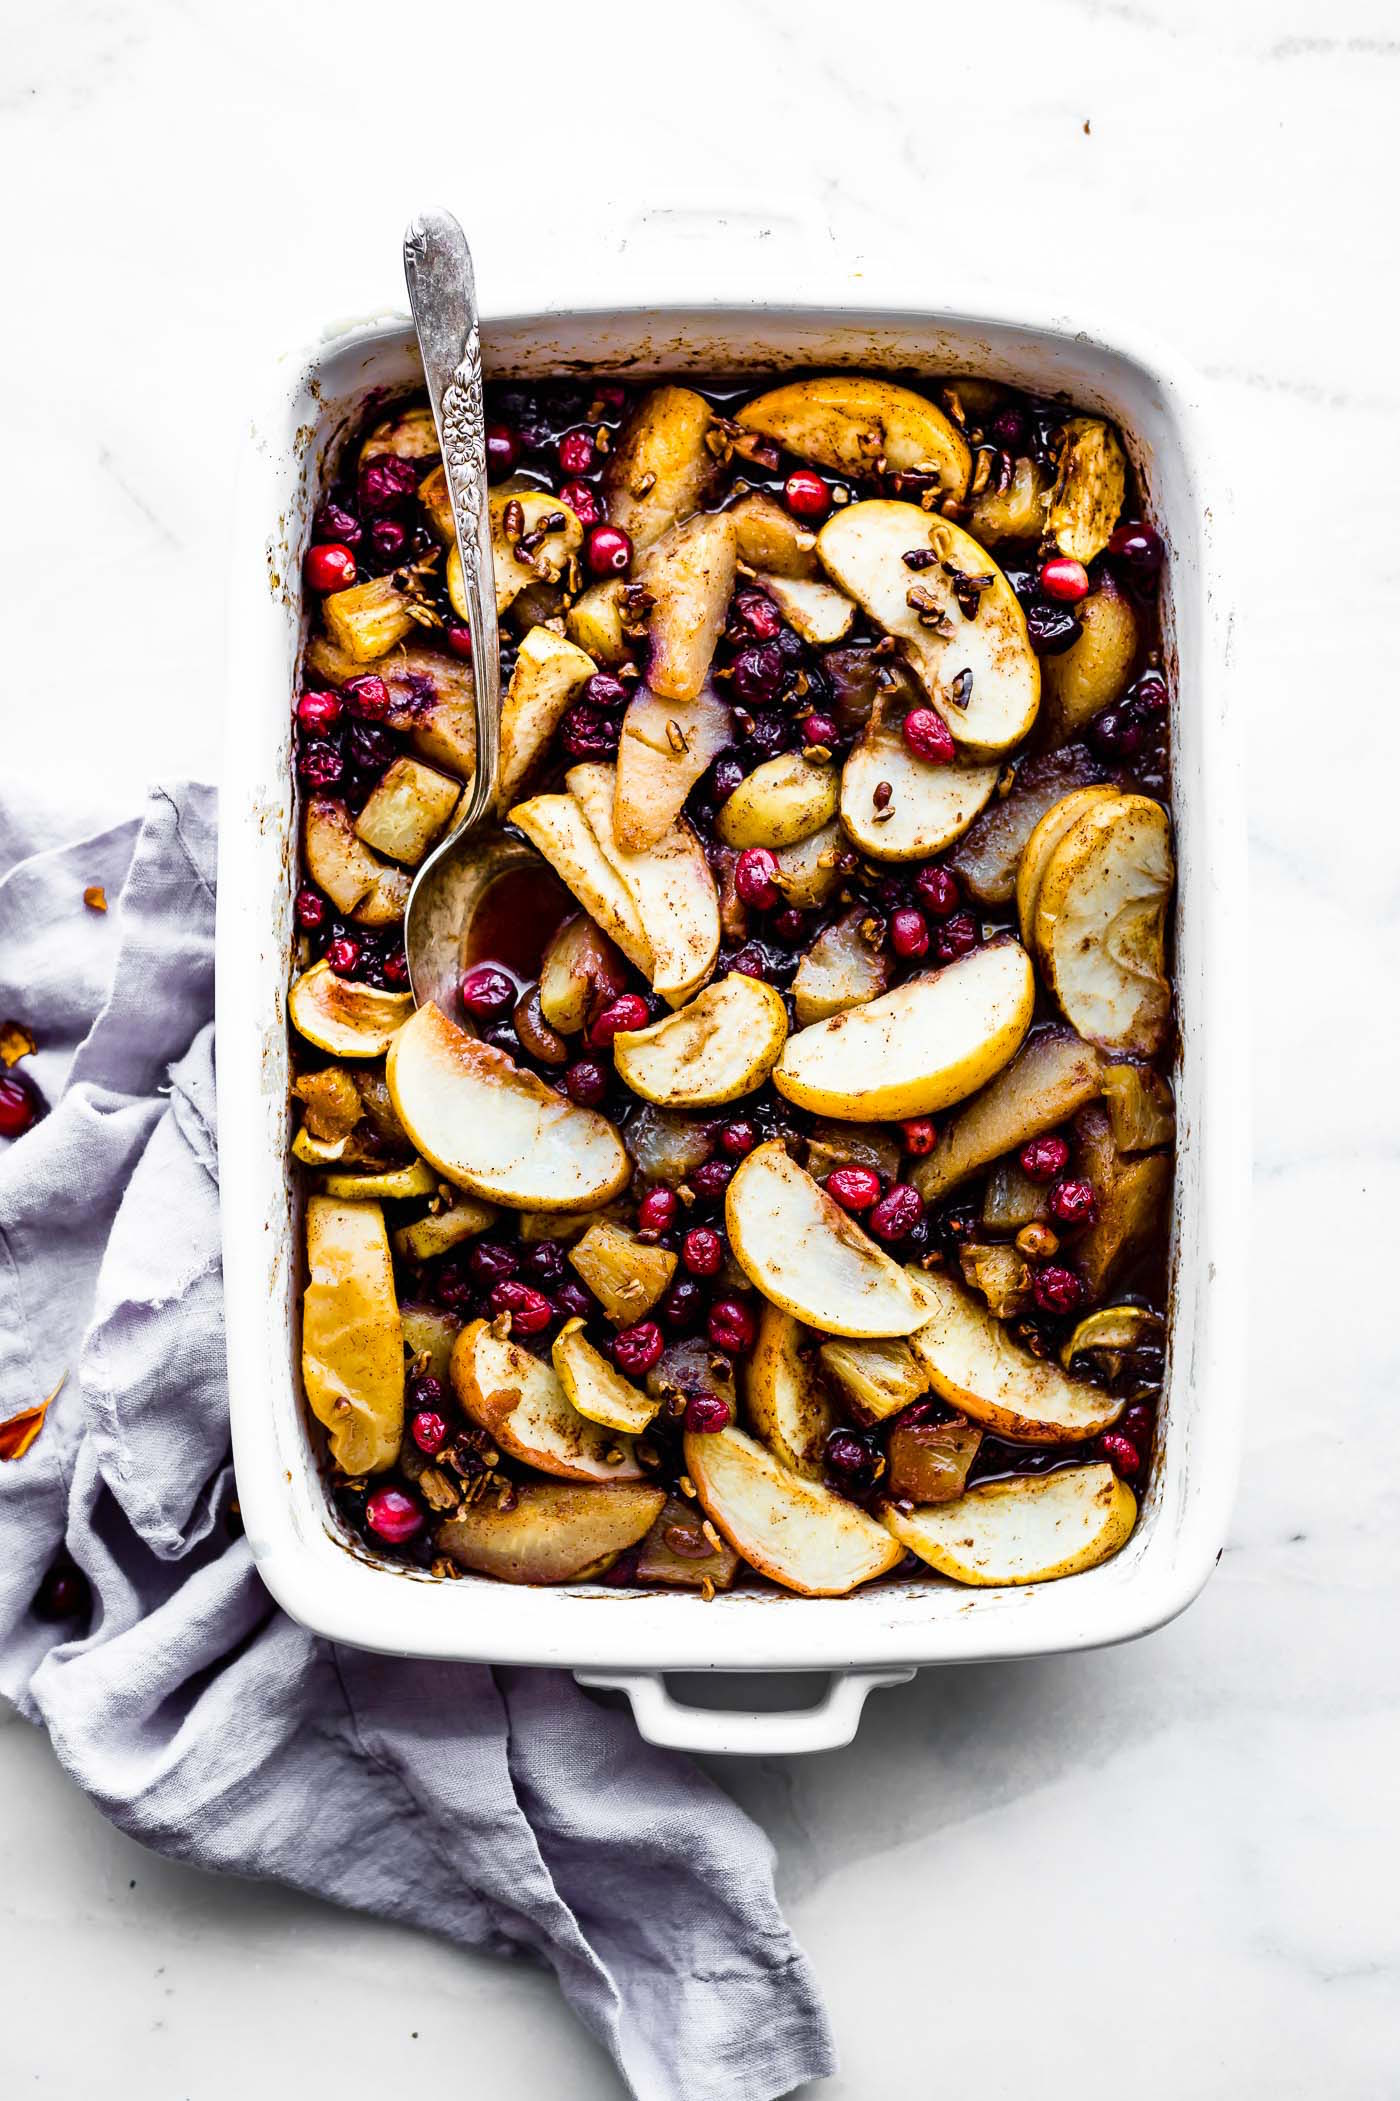 Easy spiced hot fruit bake in white casserole dish with serving spoon